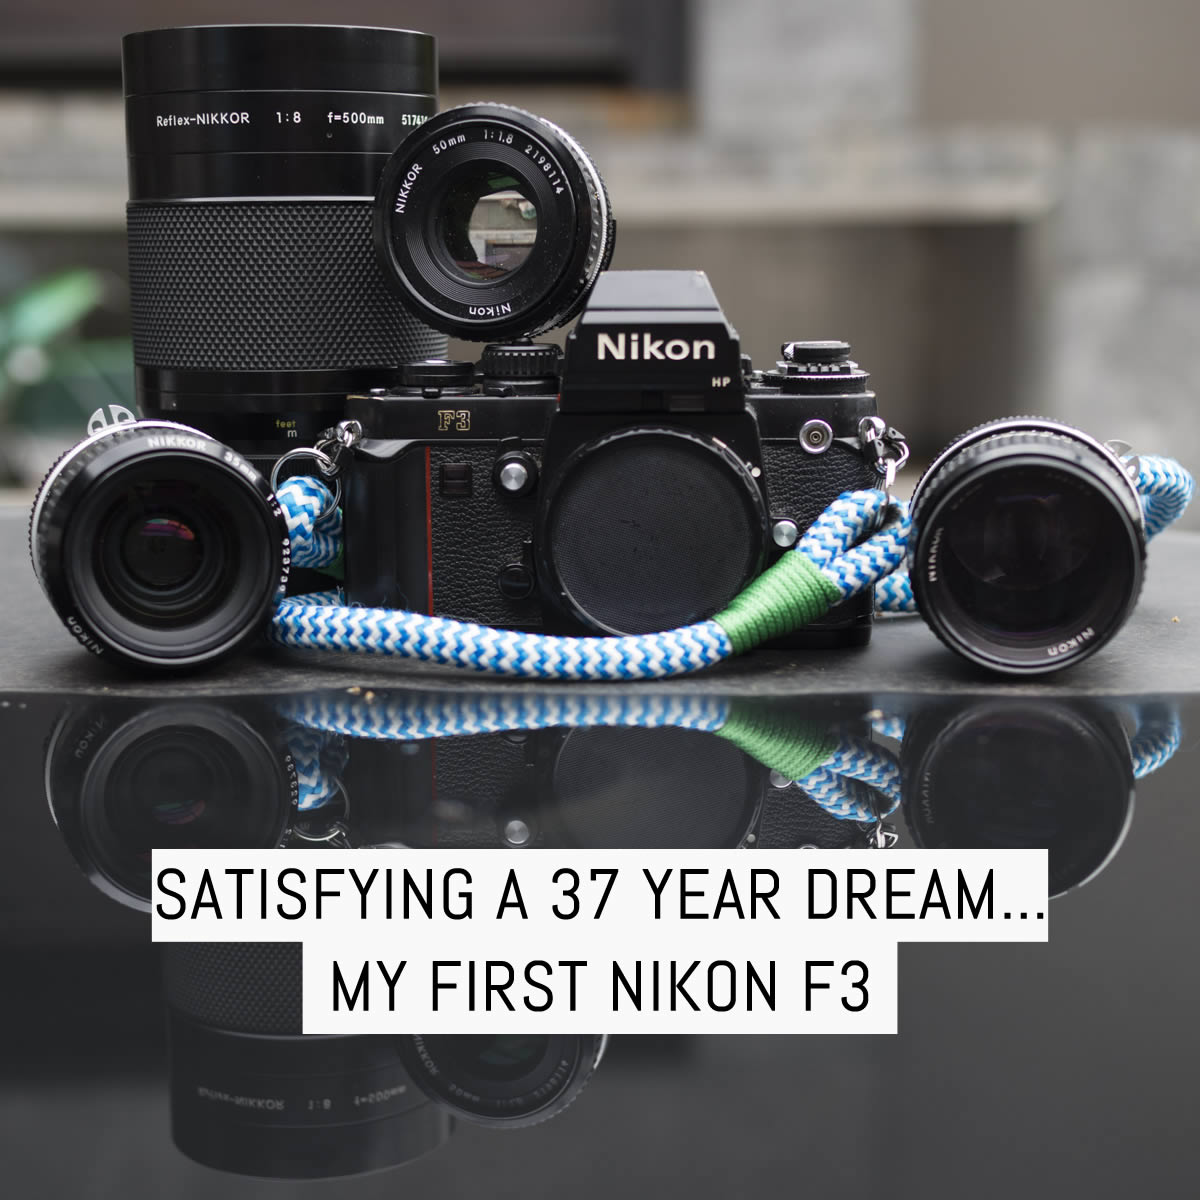 Camera review: Satisfying a 37 year dream… My first Nikon F3